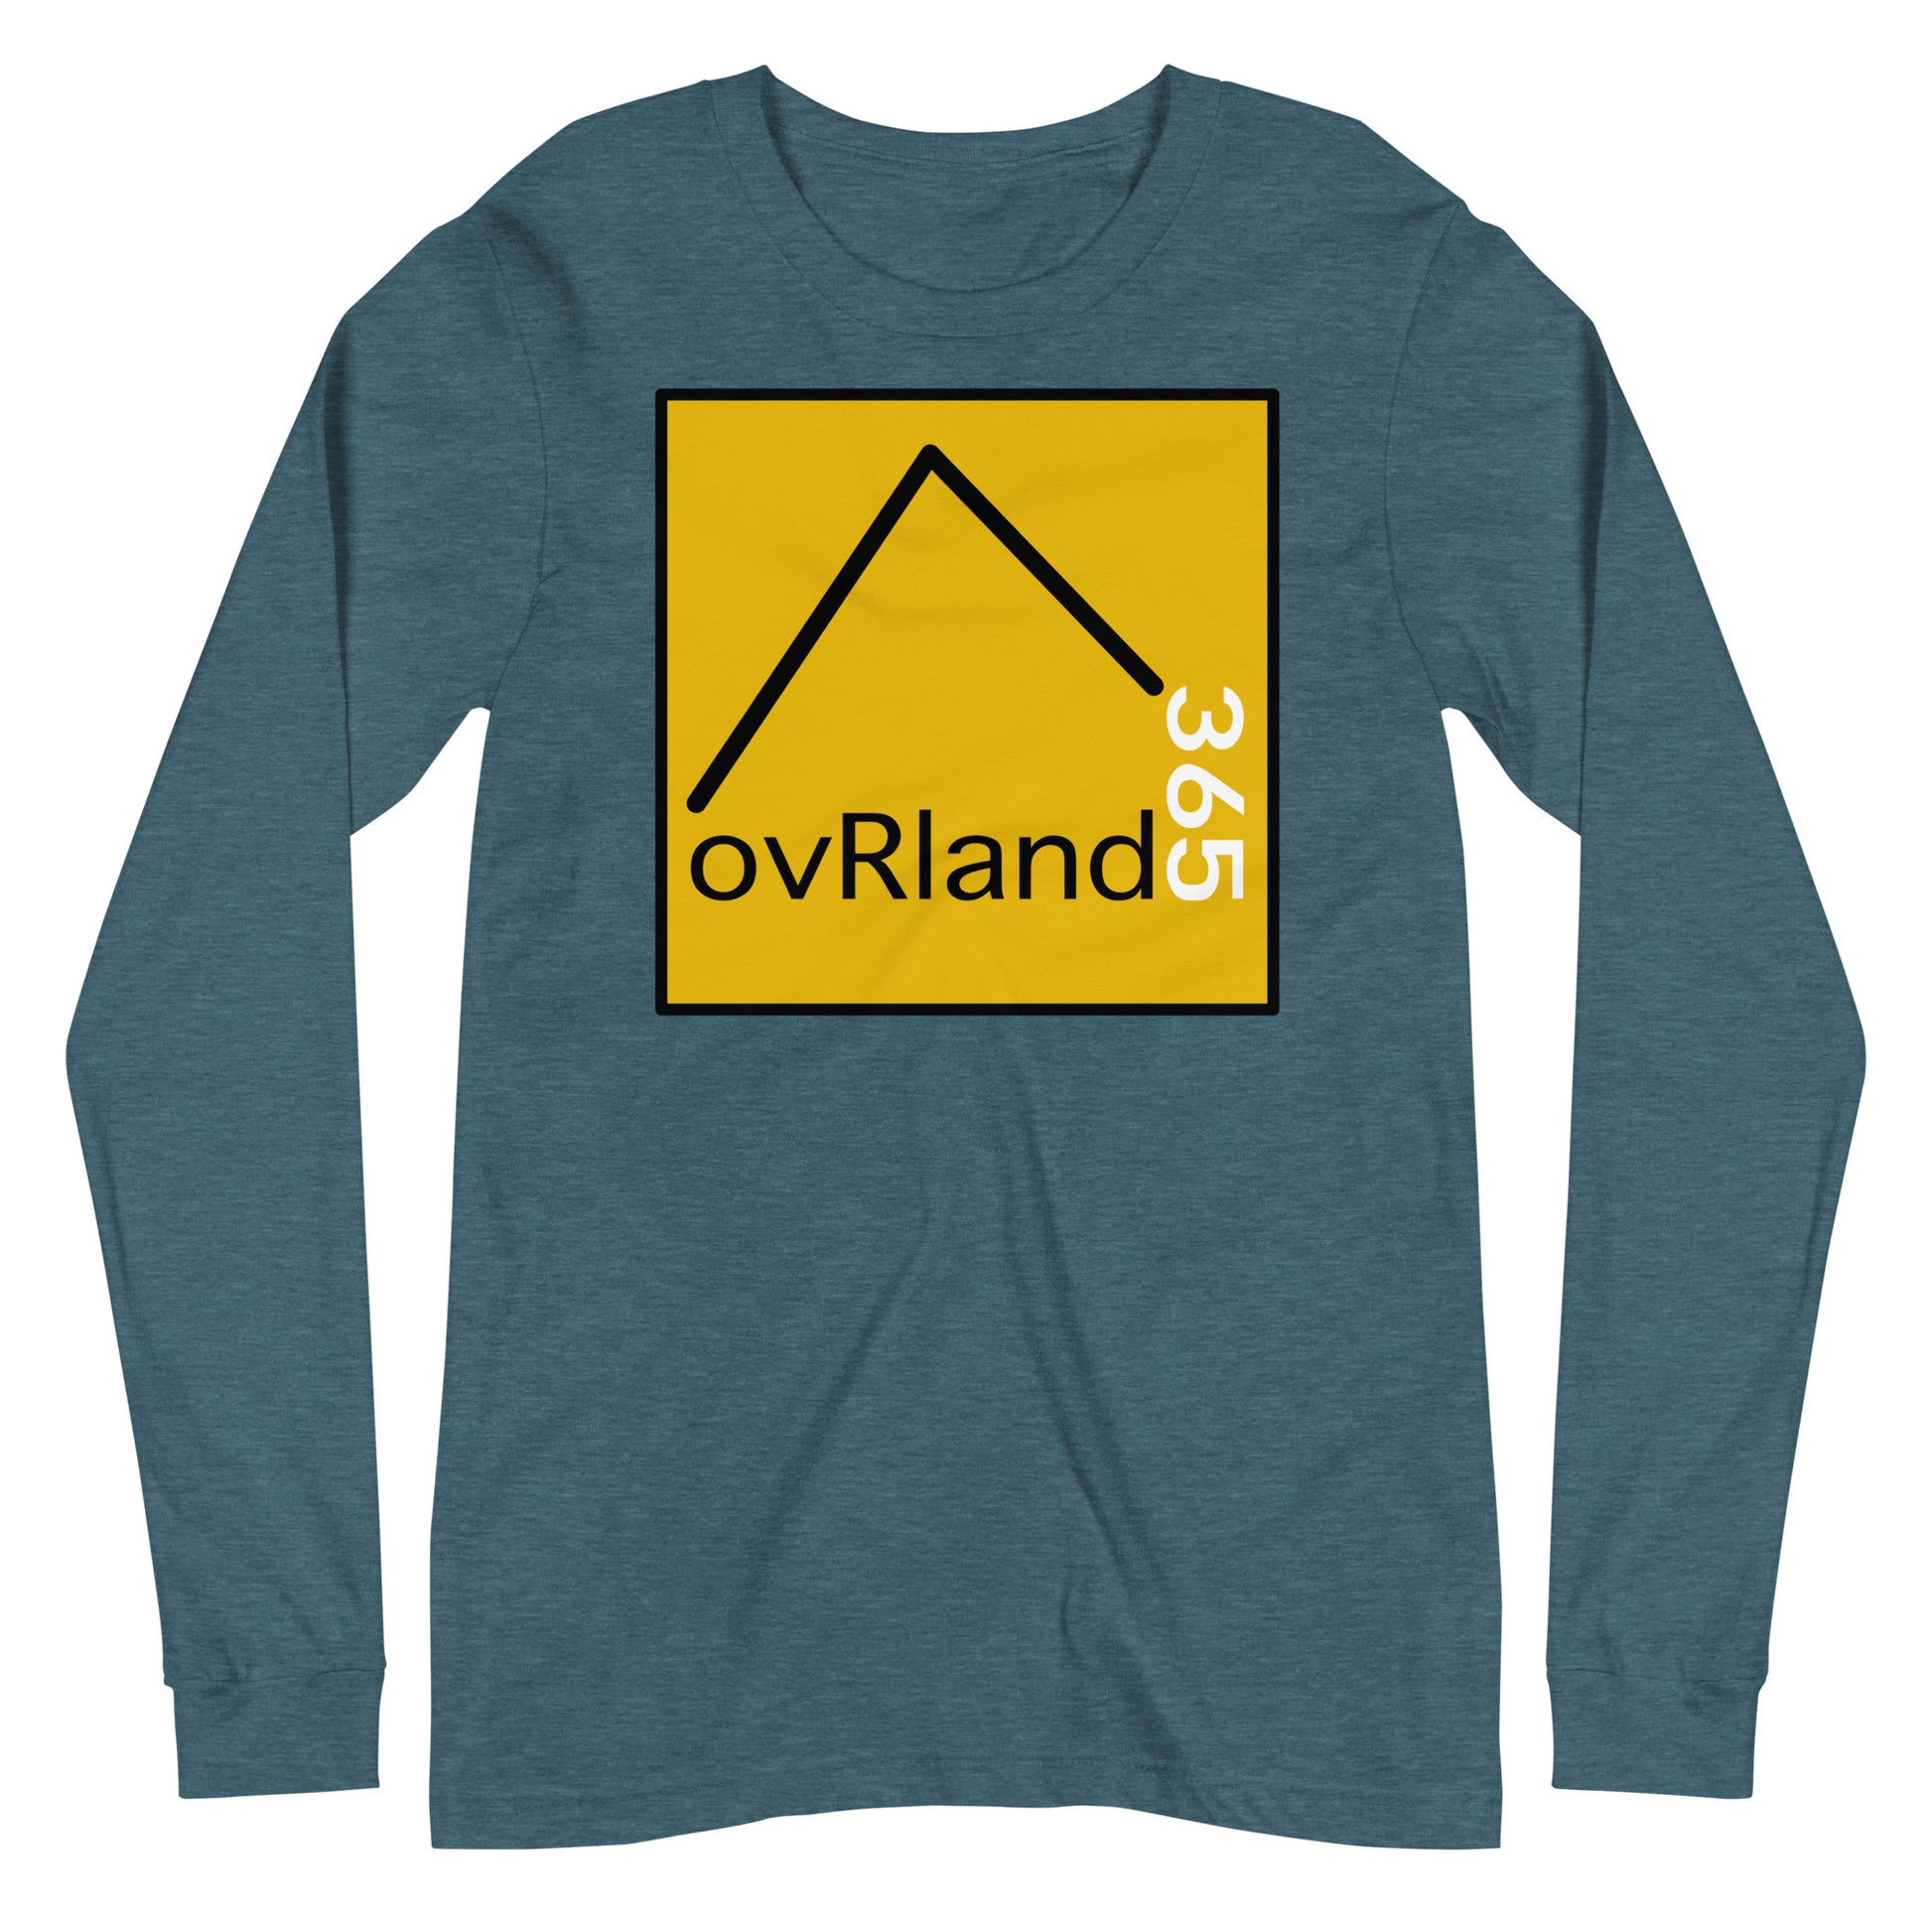 Classic ovRland365 long-sleeve, teal. overland365.com